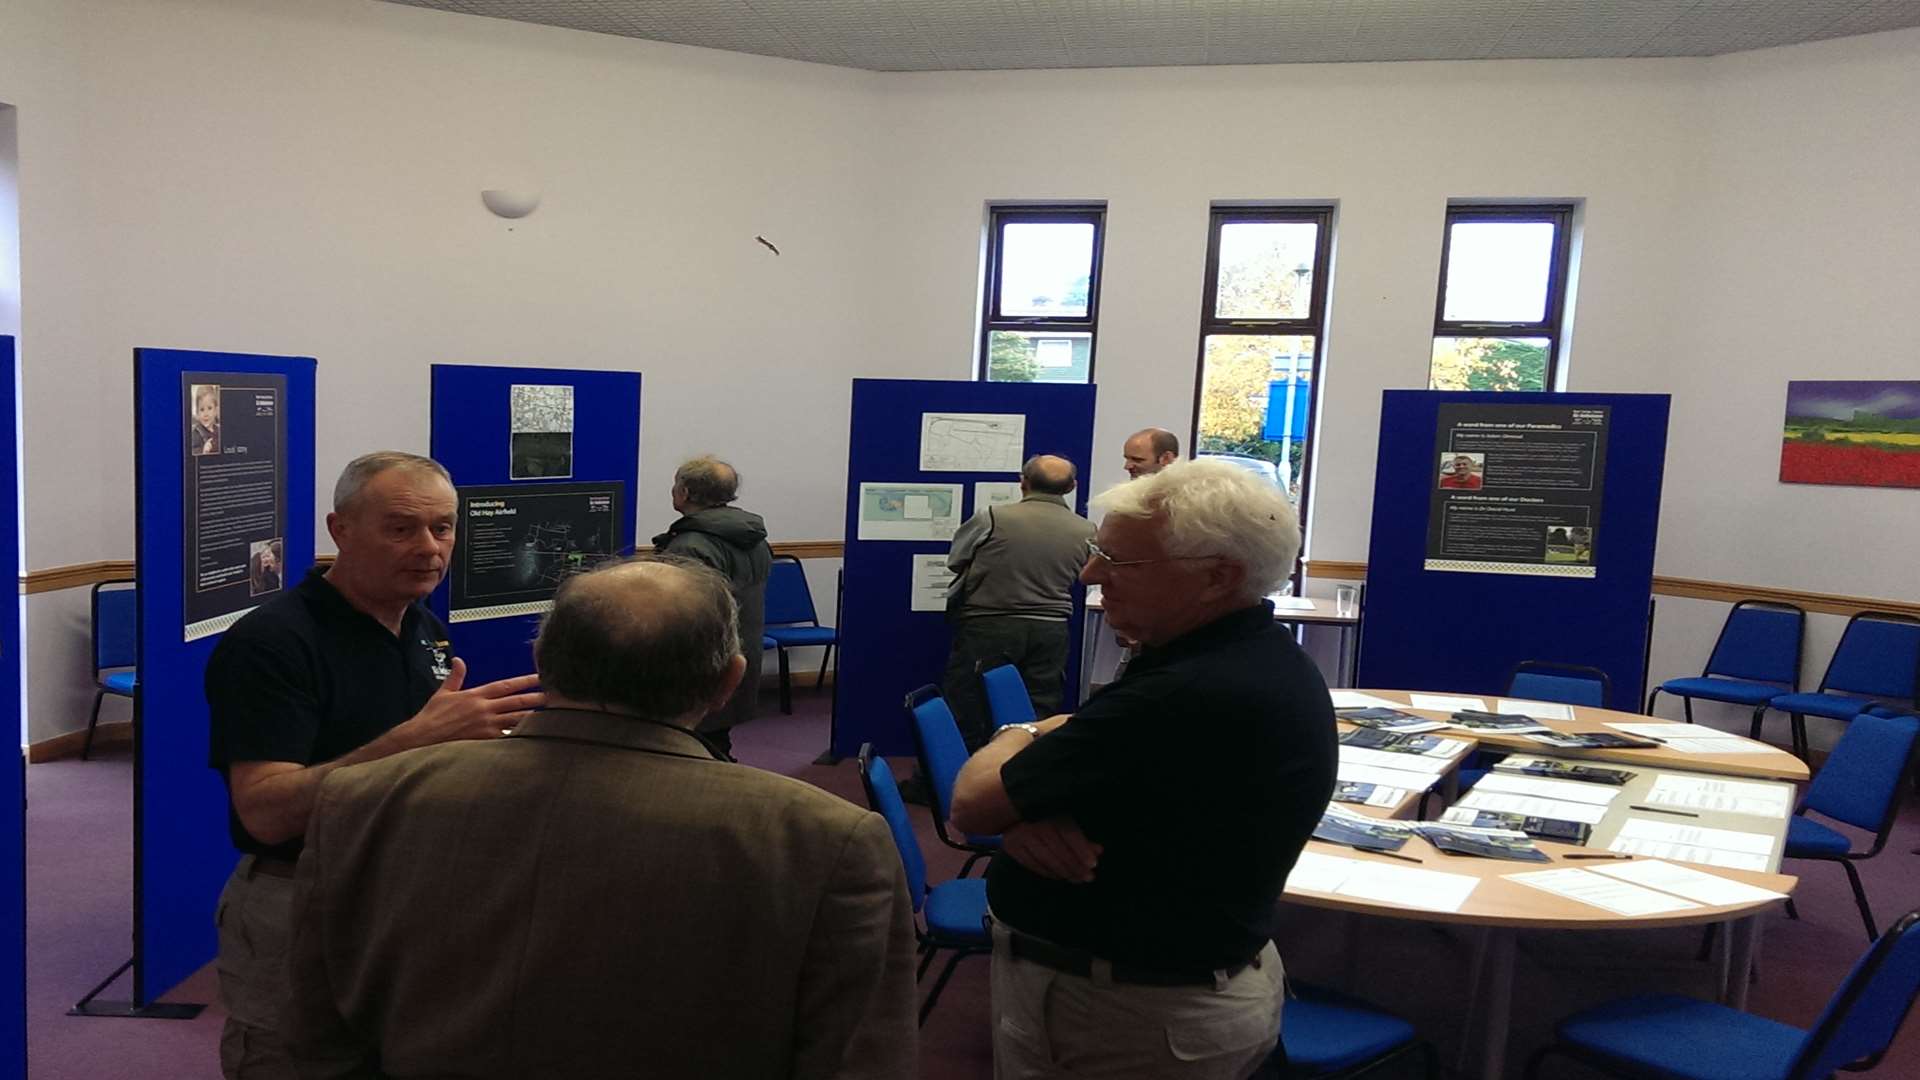 The exhibition was held at the weekend